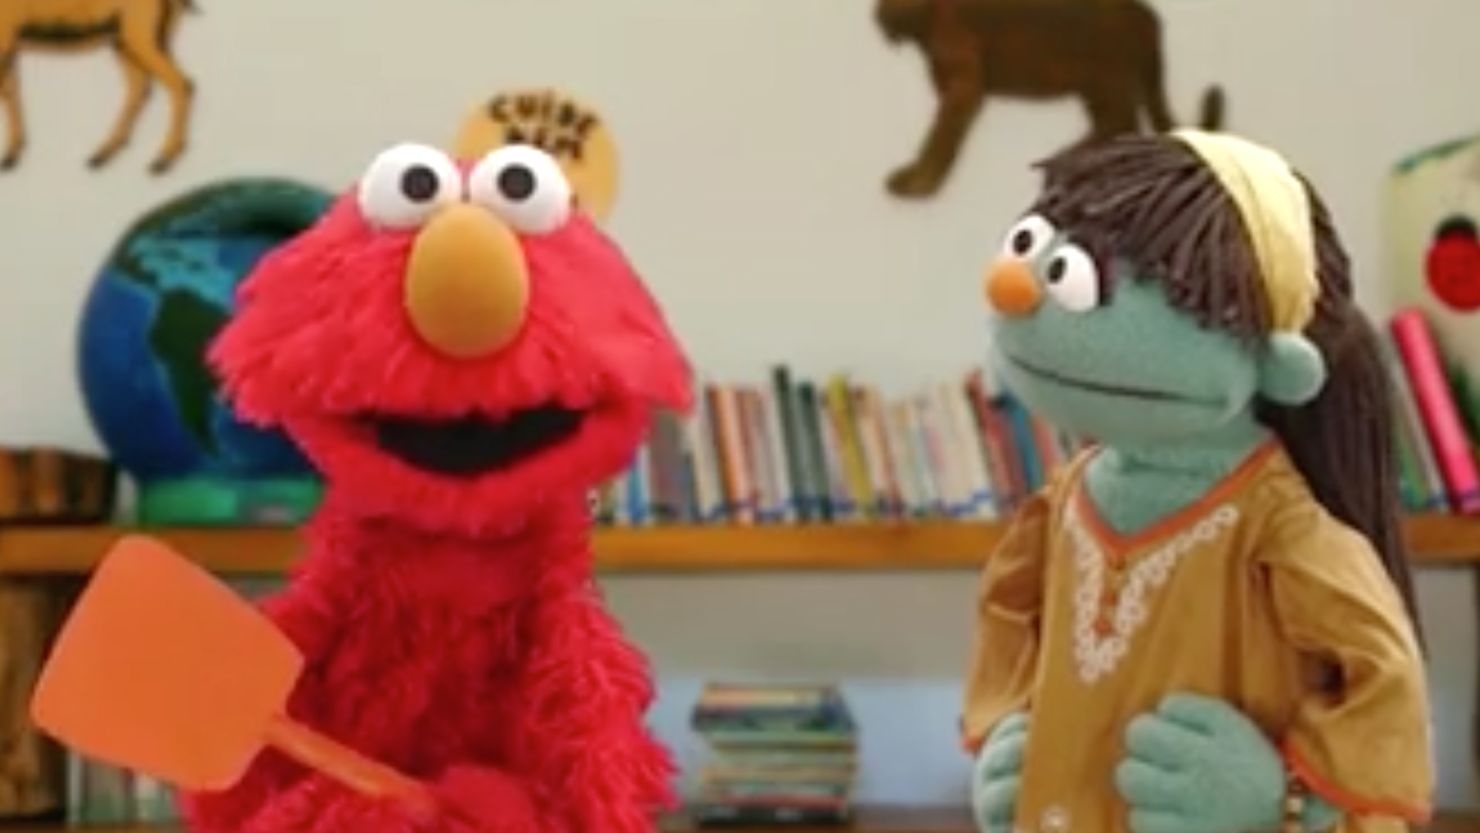 "Sesame Street" and the Pan American Health Organization have teamed up for PSA videos addressing steps to help control the spread of the devastating Zika virus.